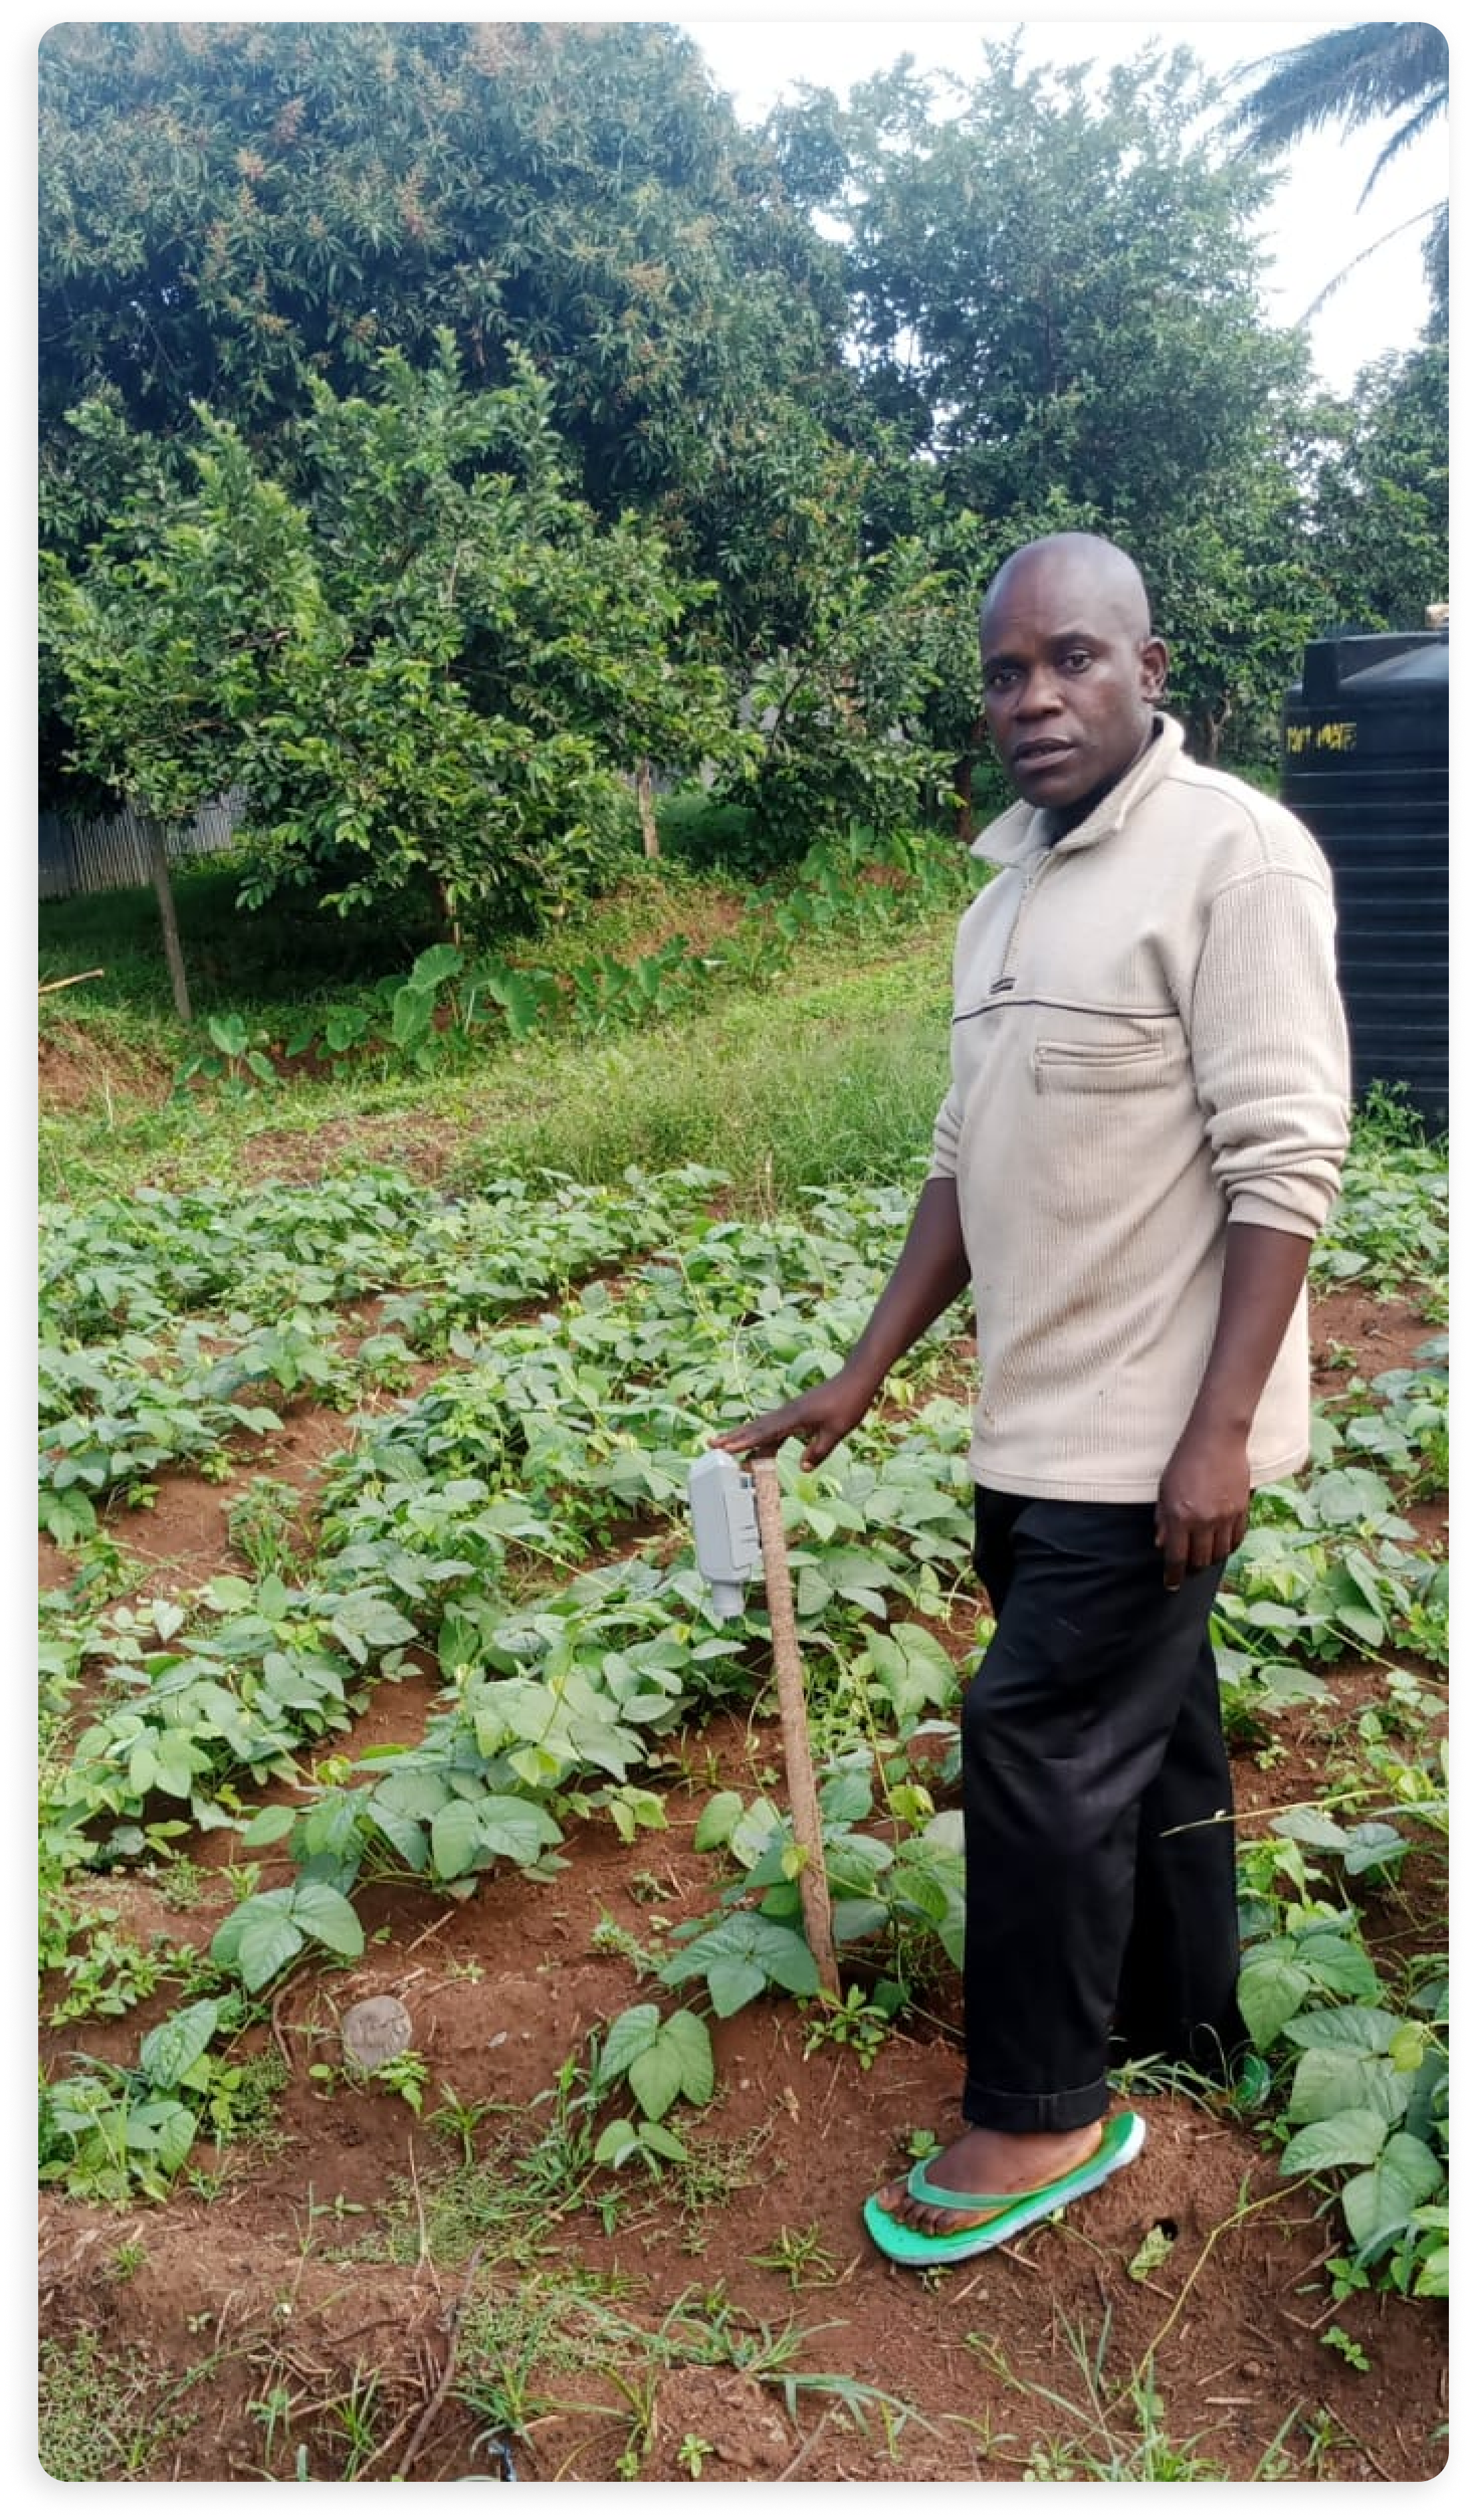 OPEN: Implementing Precision Farming in Kenya